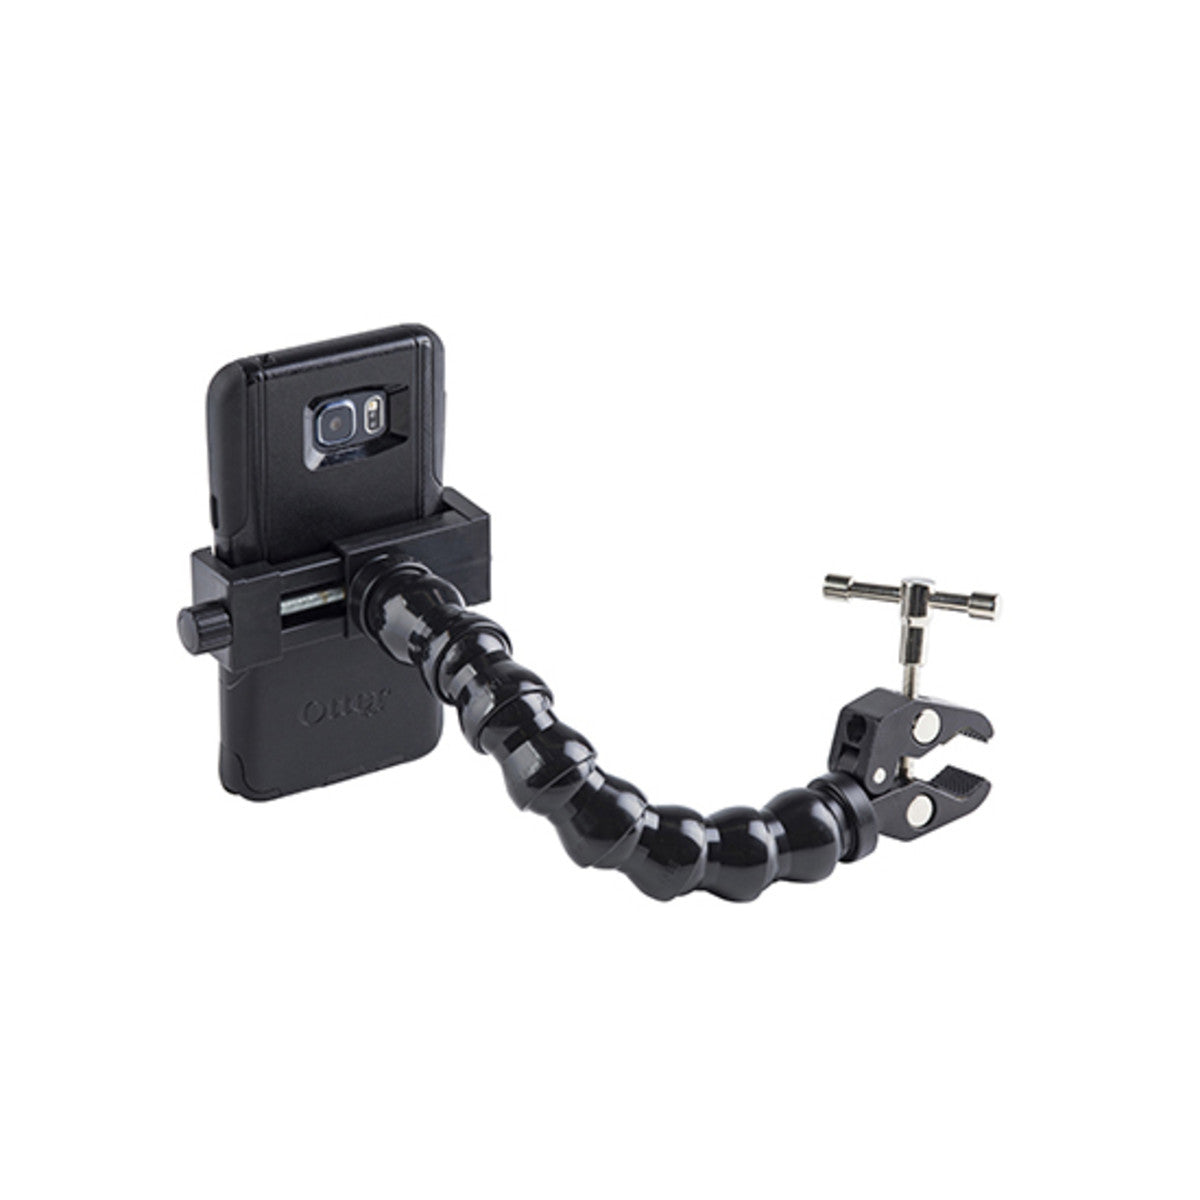 Phone Holder with Mini Clamp 8" arm